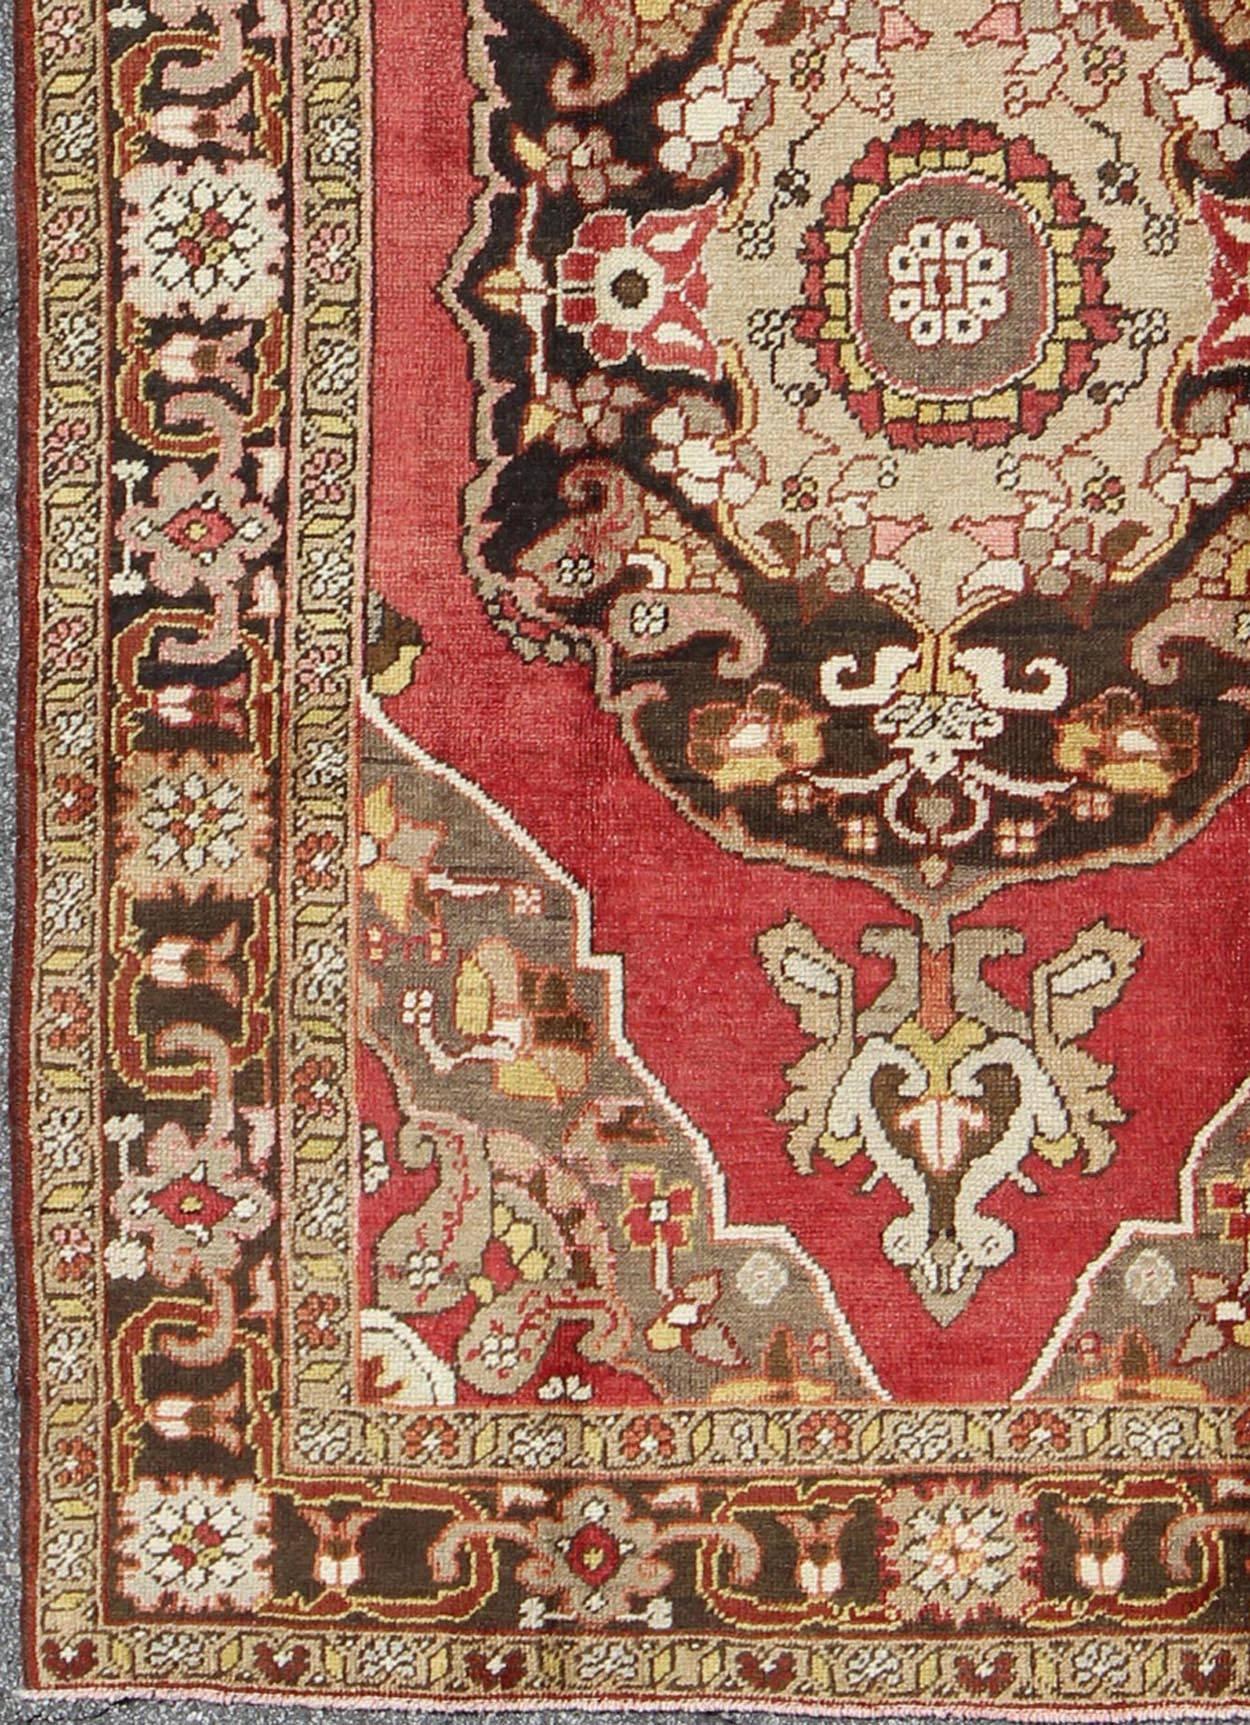 Turkish Antique oushak with scroll-flower pattern in brown, red, light green, gray taupe and yellow. En-112094, 1930's Antique Turkish Oushak Rug. 

This wonderful Turkish Oushak features chocolate brown border and medallion, red background with a